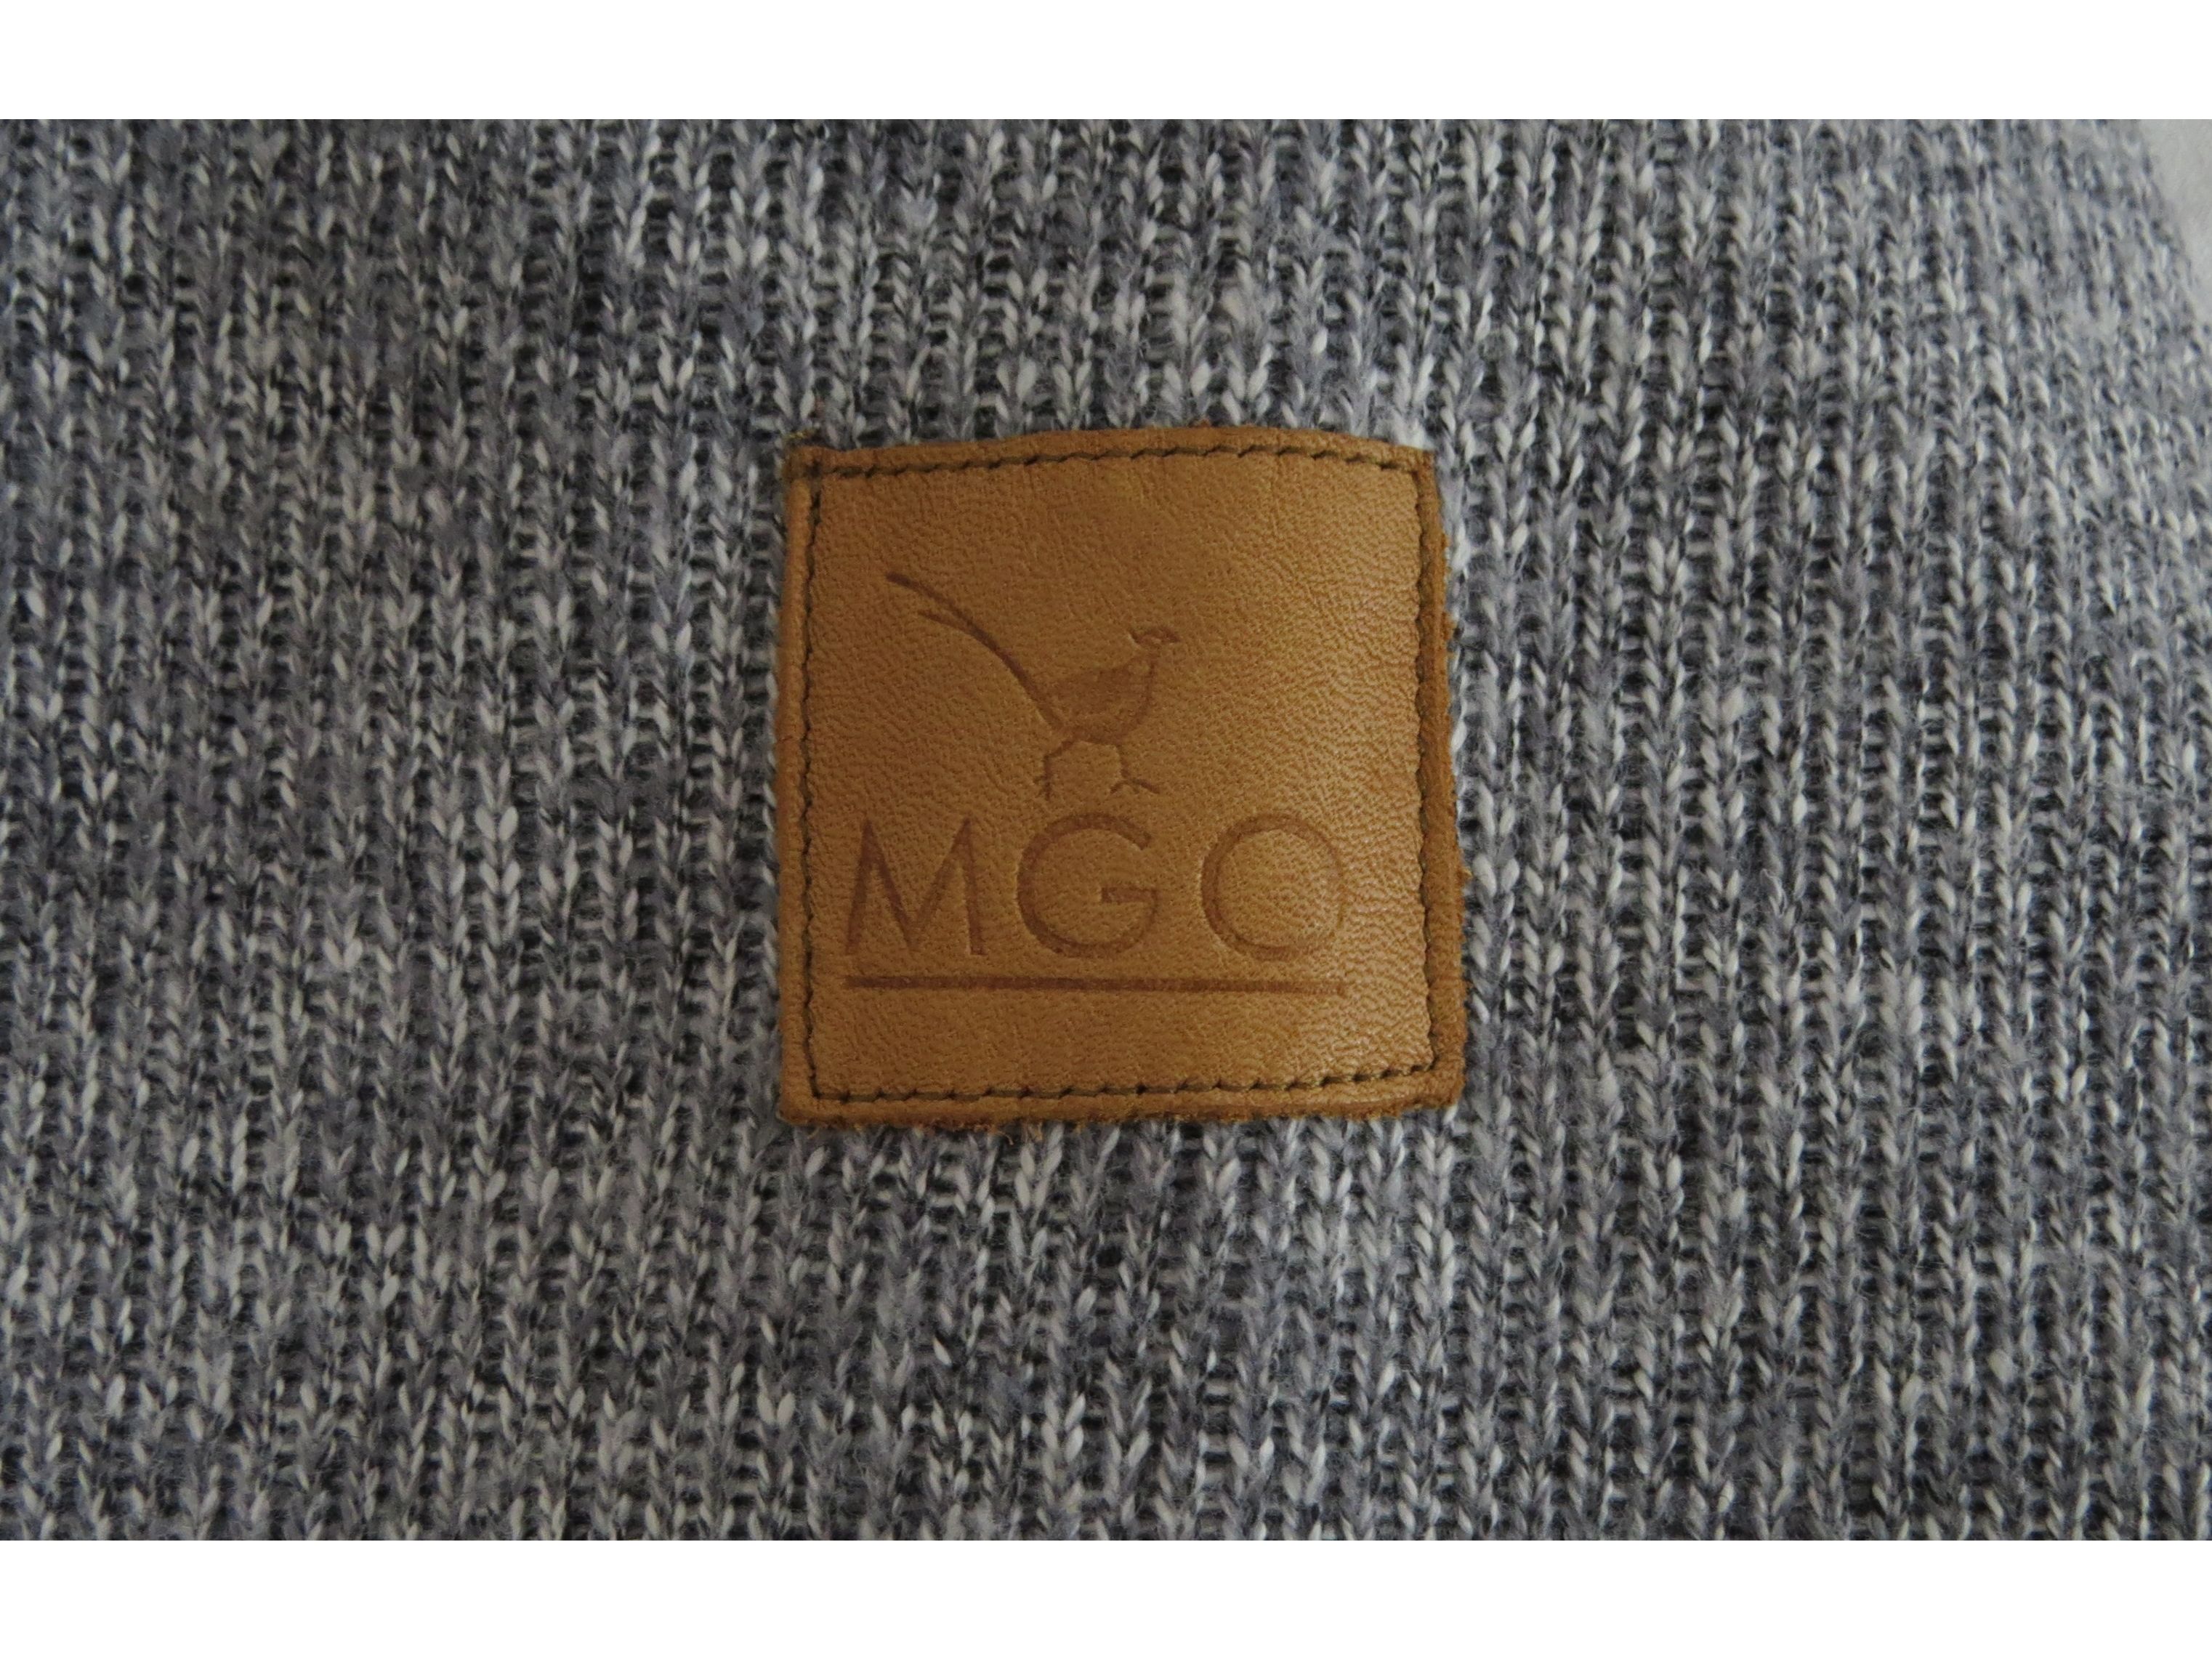 mgo-pine-pullover